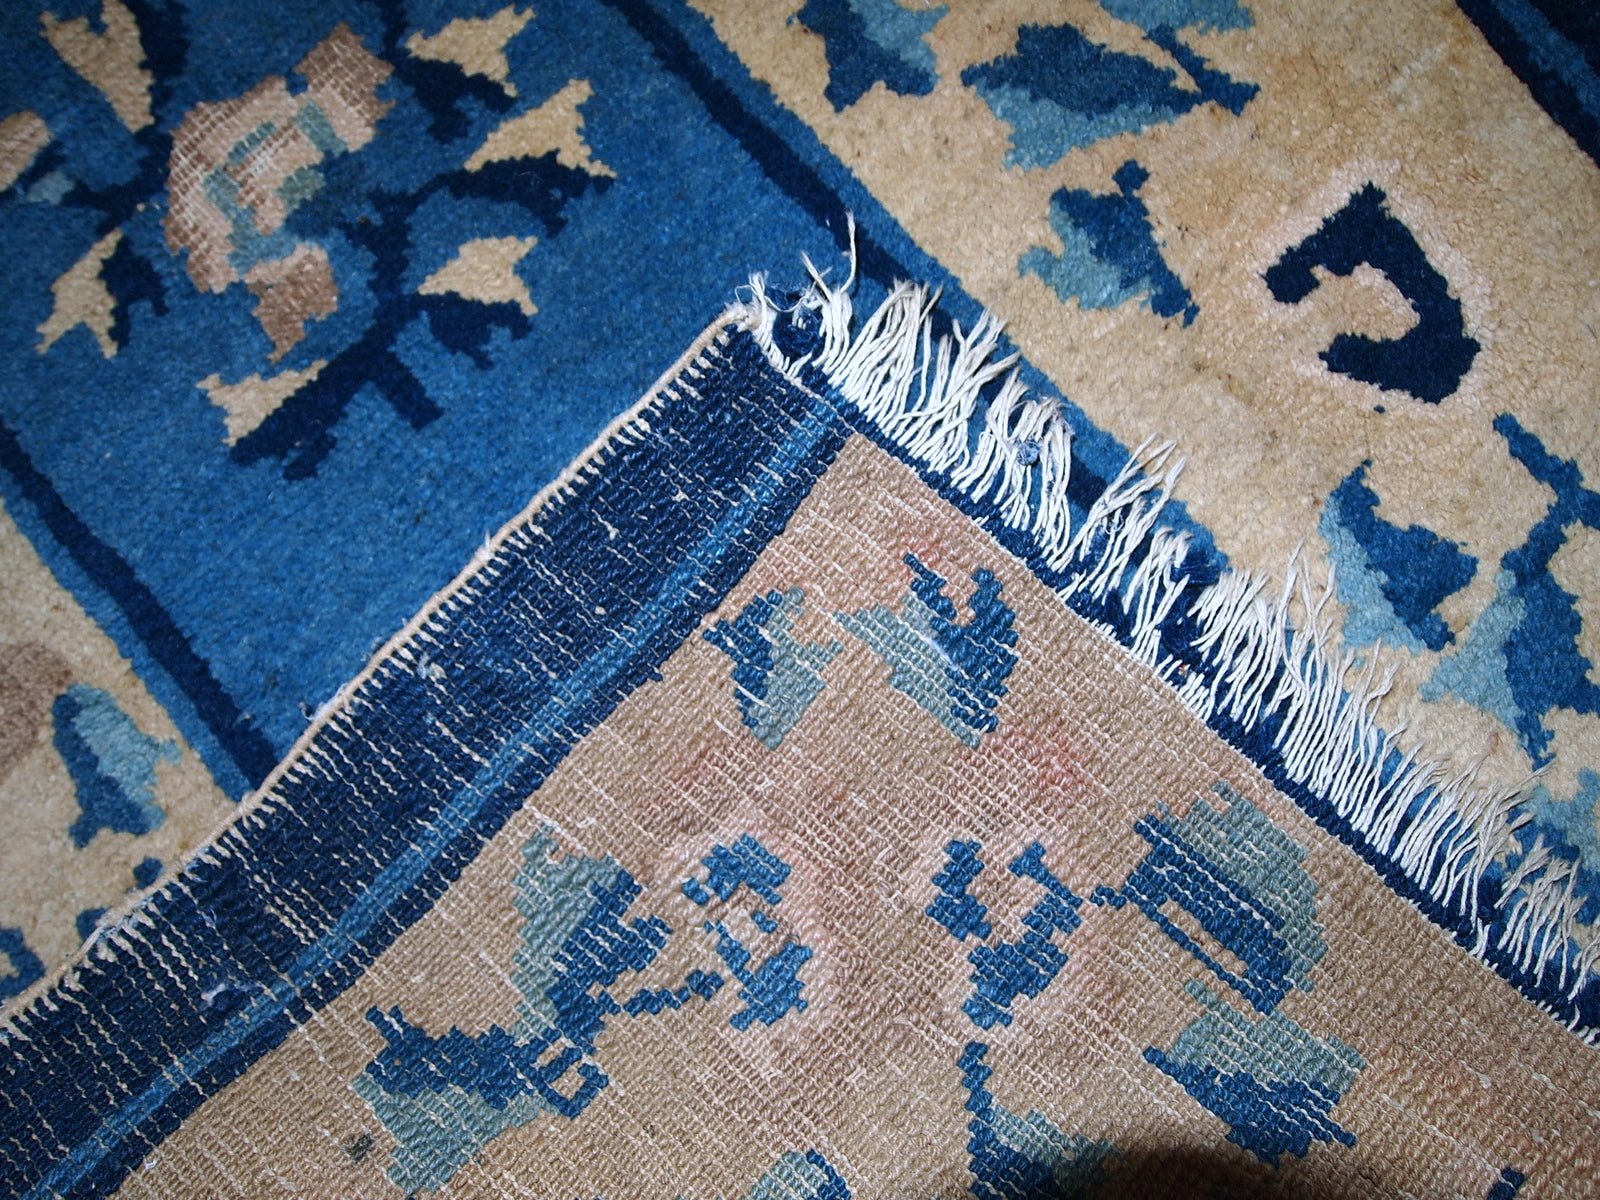 Reverse side of the antique Peking Chinese rug, showcasing craftsmanship and texture.